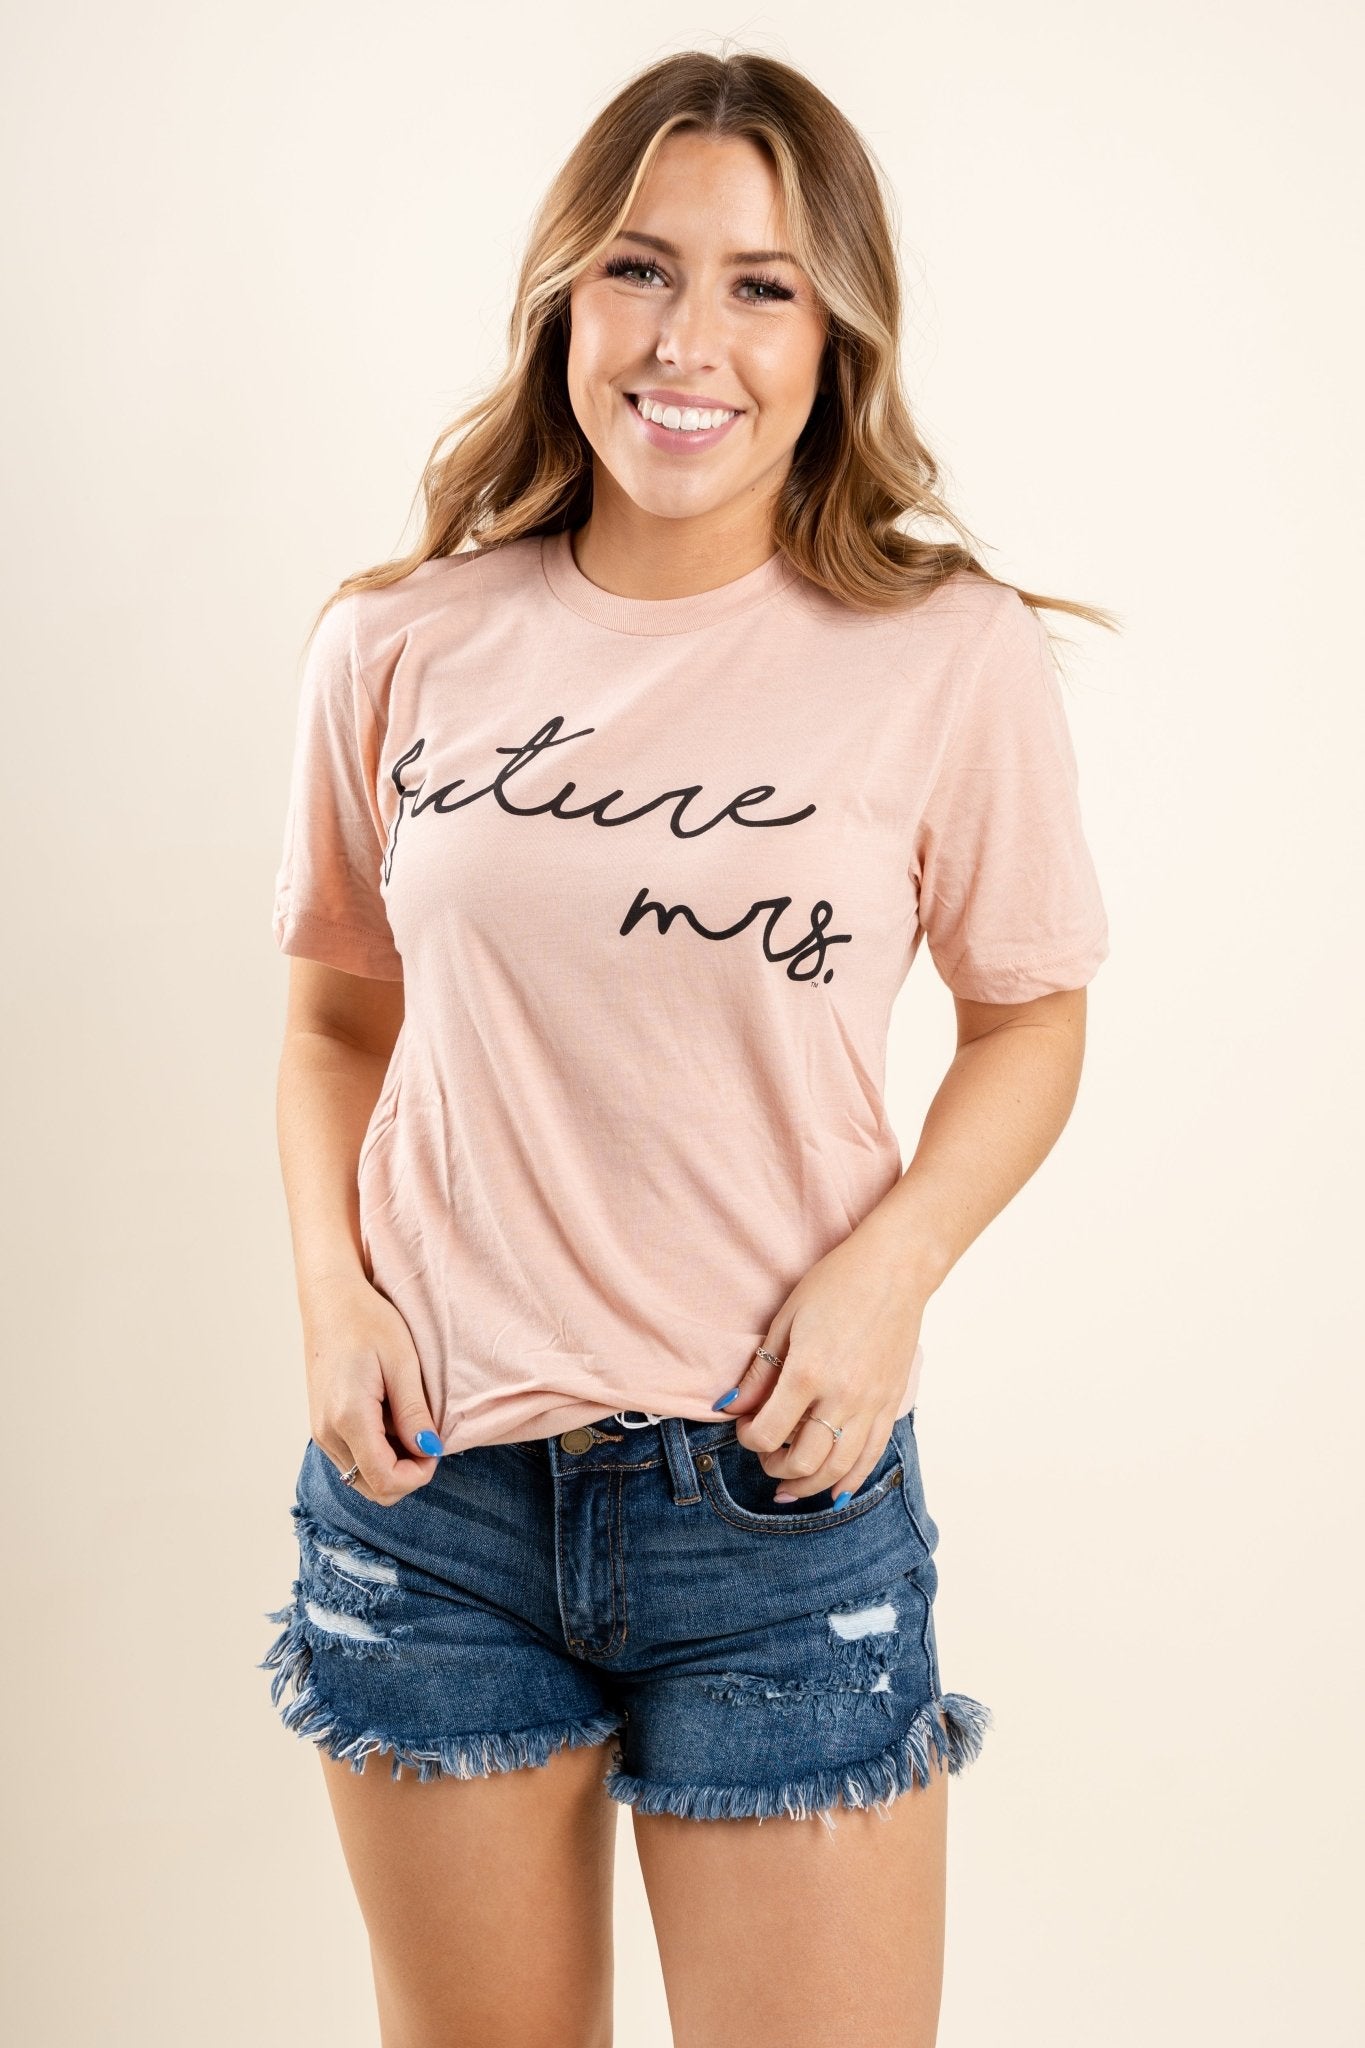 Future Mrs unisex short sleeve t-shirt peach - Adorable T-shirts - Unique Tank Tops and Graphic Tees at Lush Fashion Lounge Boutique in Oklahoma